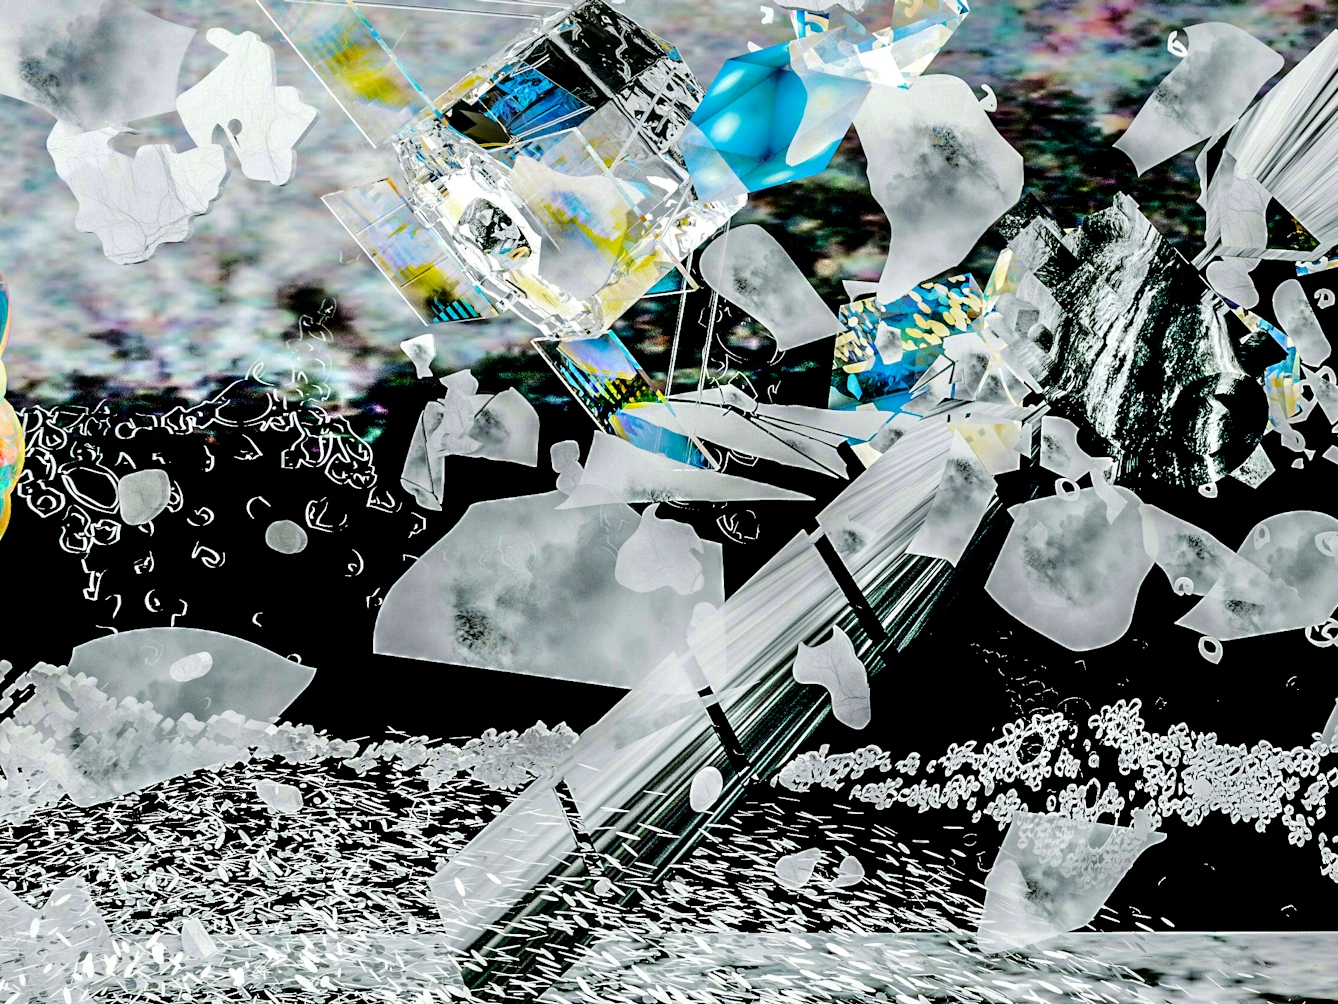 Mixed media artwork depicting a detail from a larger diorama. The scene is rich in details showing a fragmented abstract orbiting satellite, solar panel wings outstretched. Surrounding the satellite are lots of angular floating shapes resembling a field of debris.